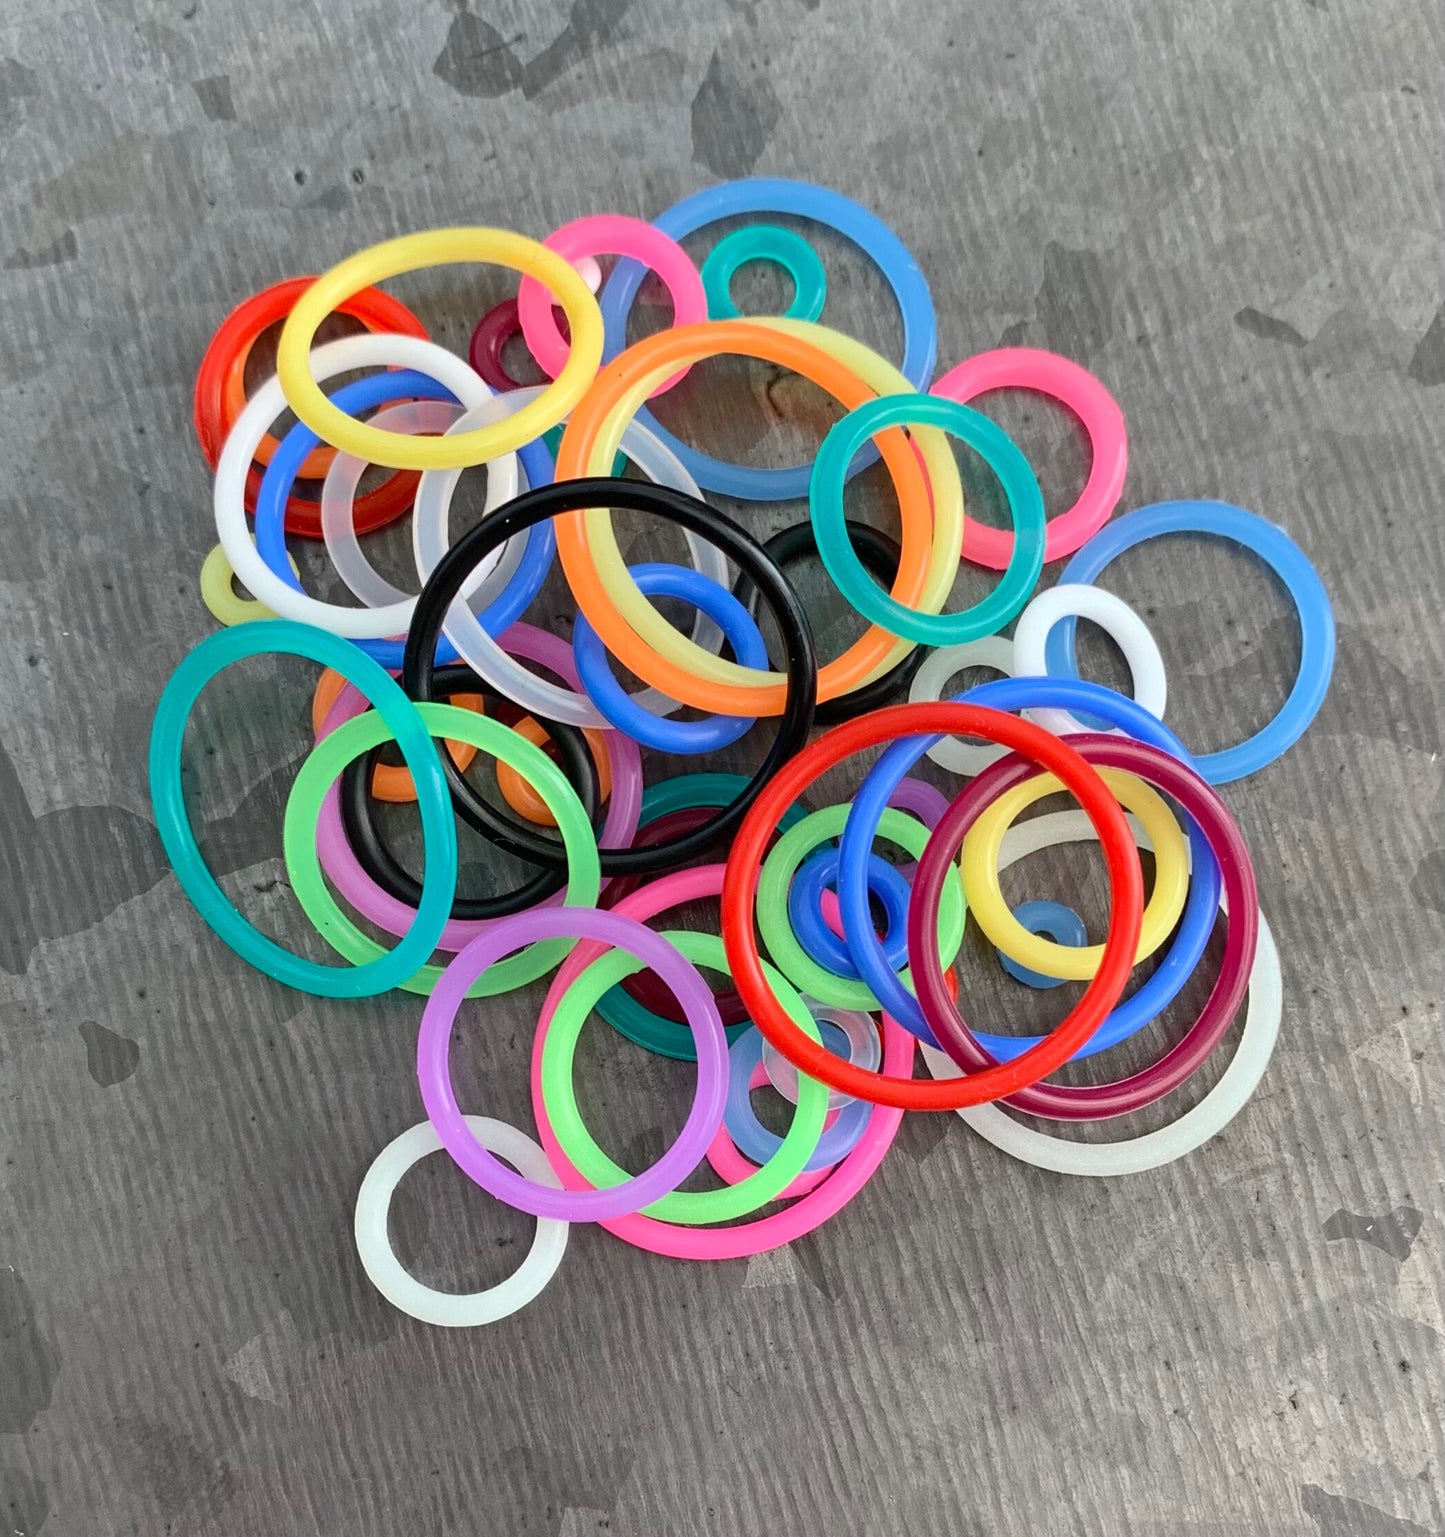 10 pack of Orange Replacement O-Rings Bands for Plugs or Tunnels - 13 more colors available!